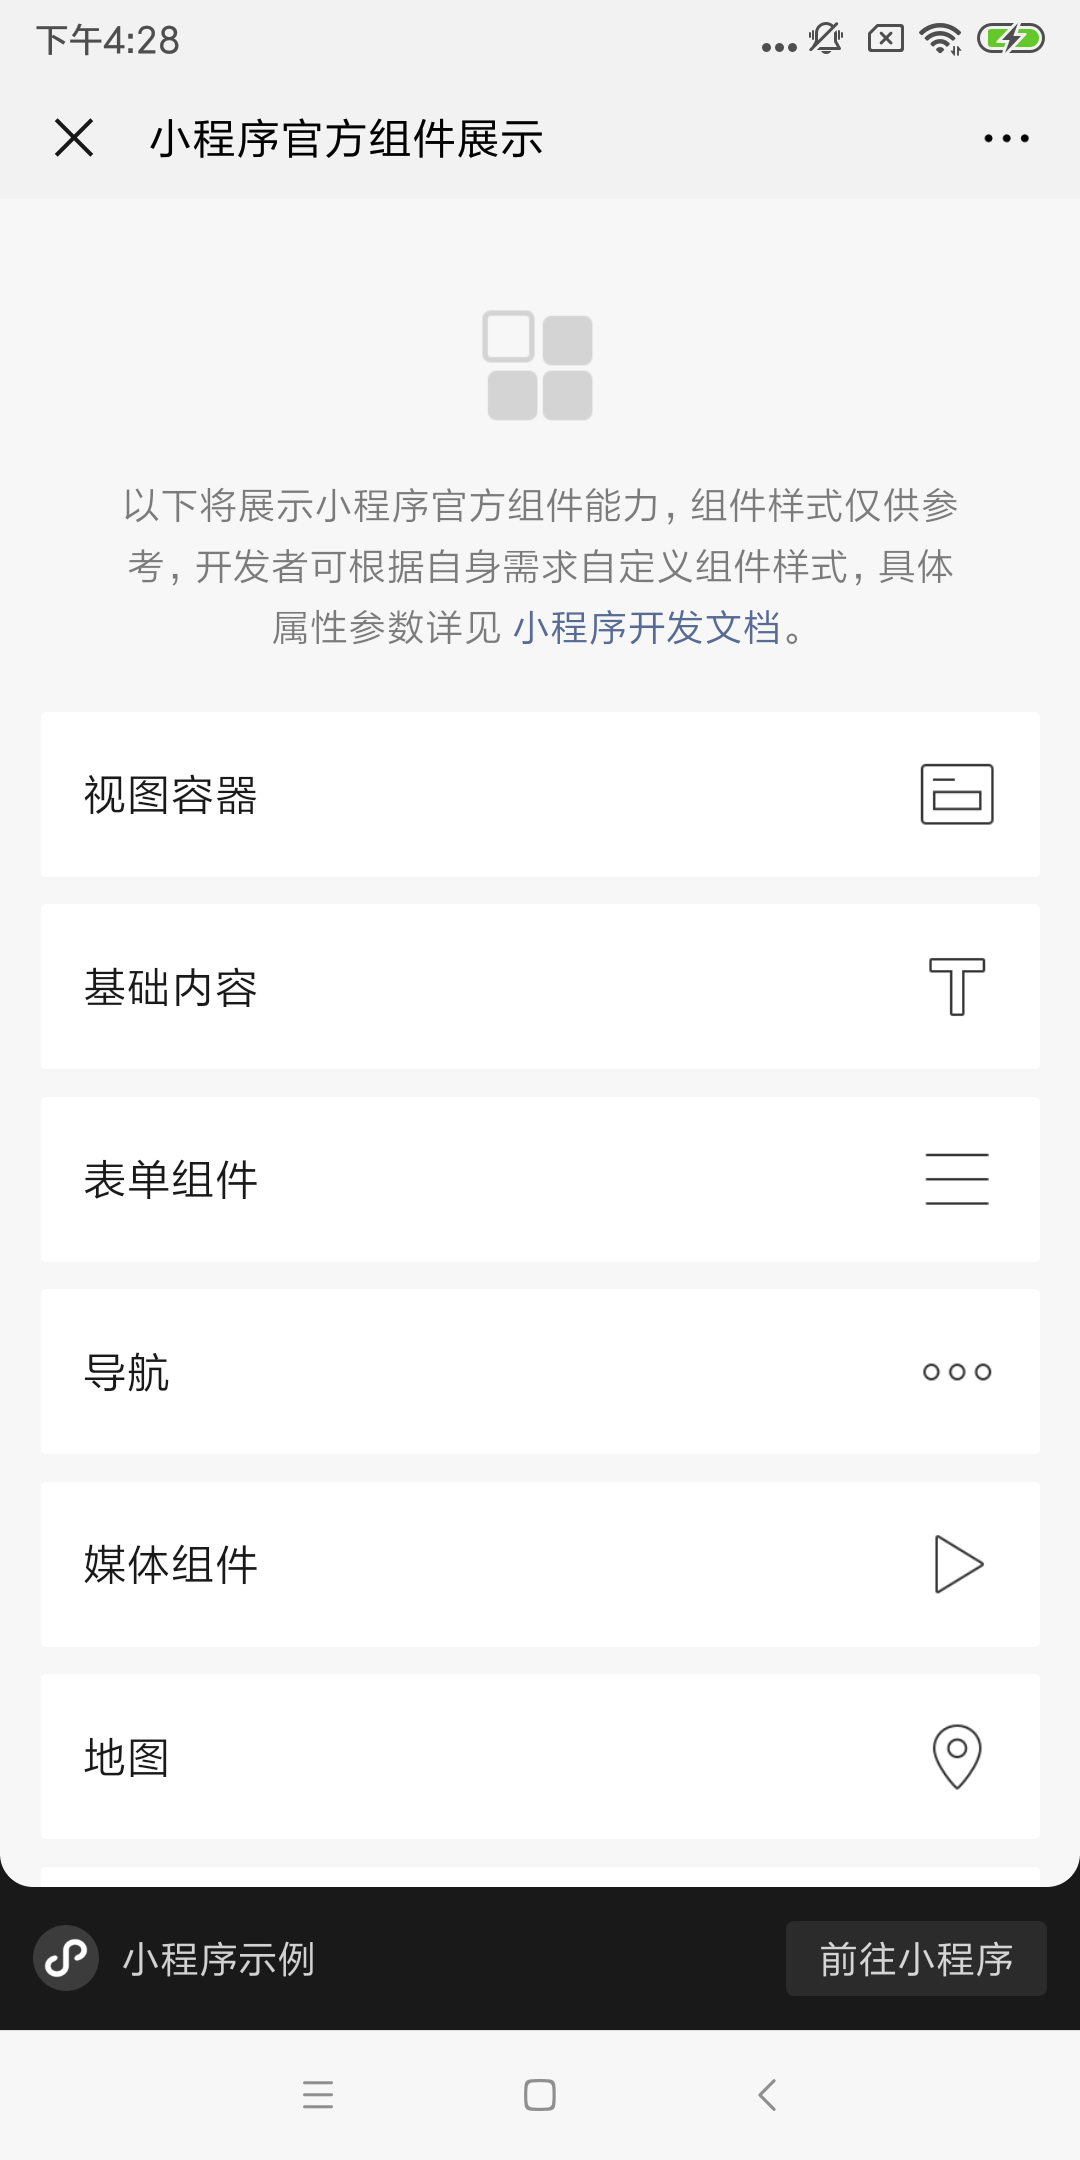 WeChat app shares to Beta